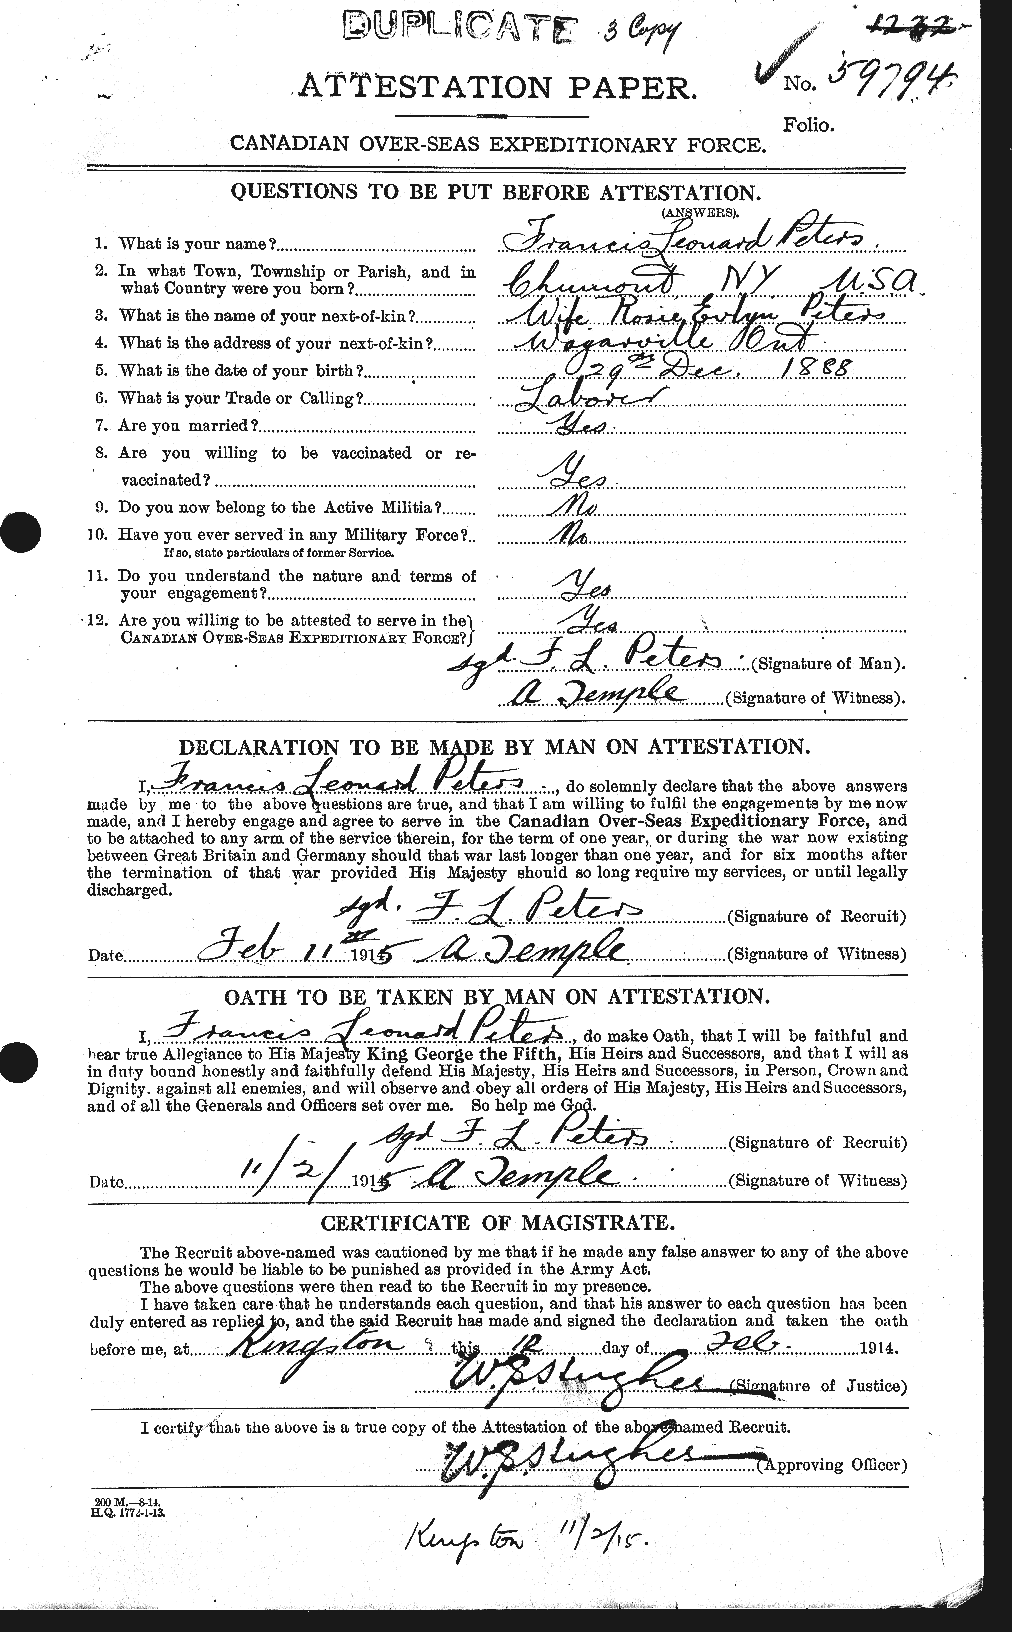 Personnel Records of the First World War - CEF 575424a